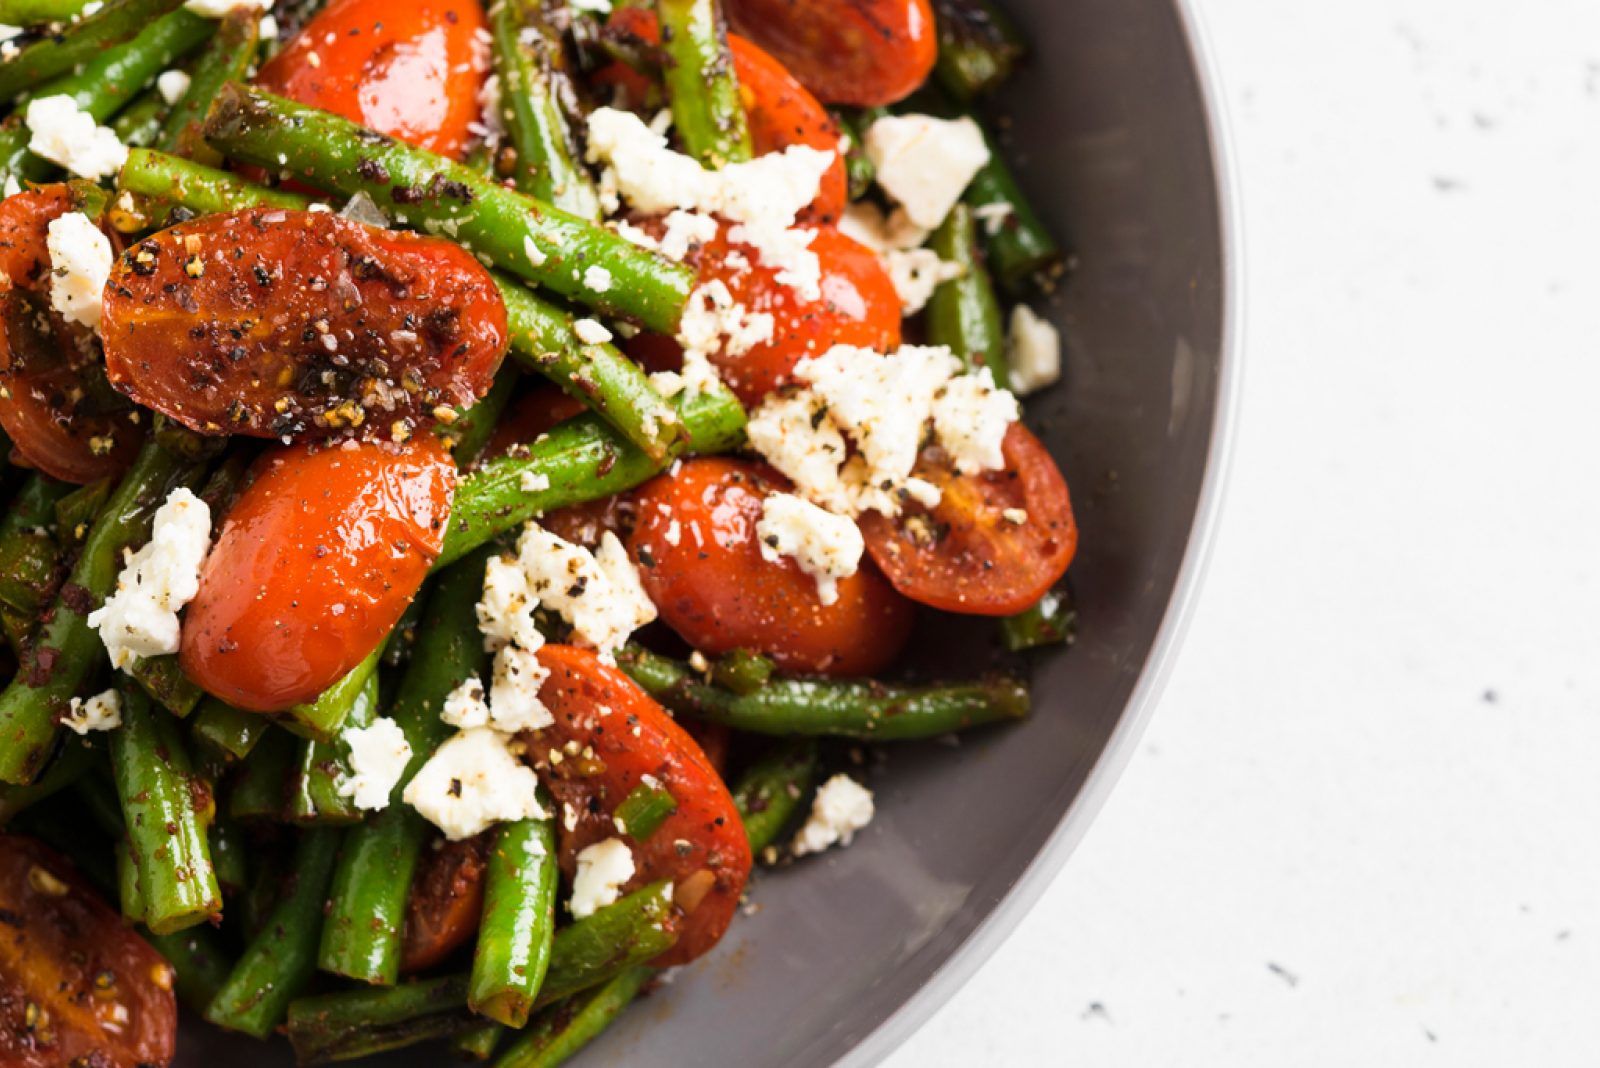 seared-steamed-green-beans-tomatoes-cookish WEB